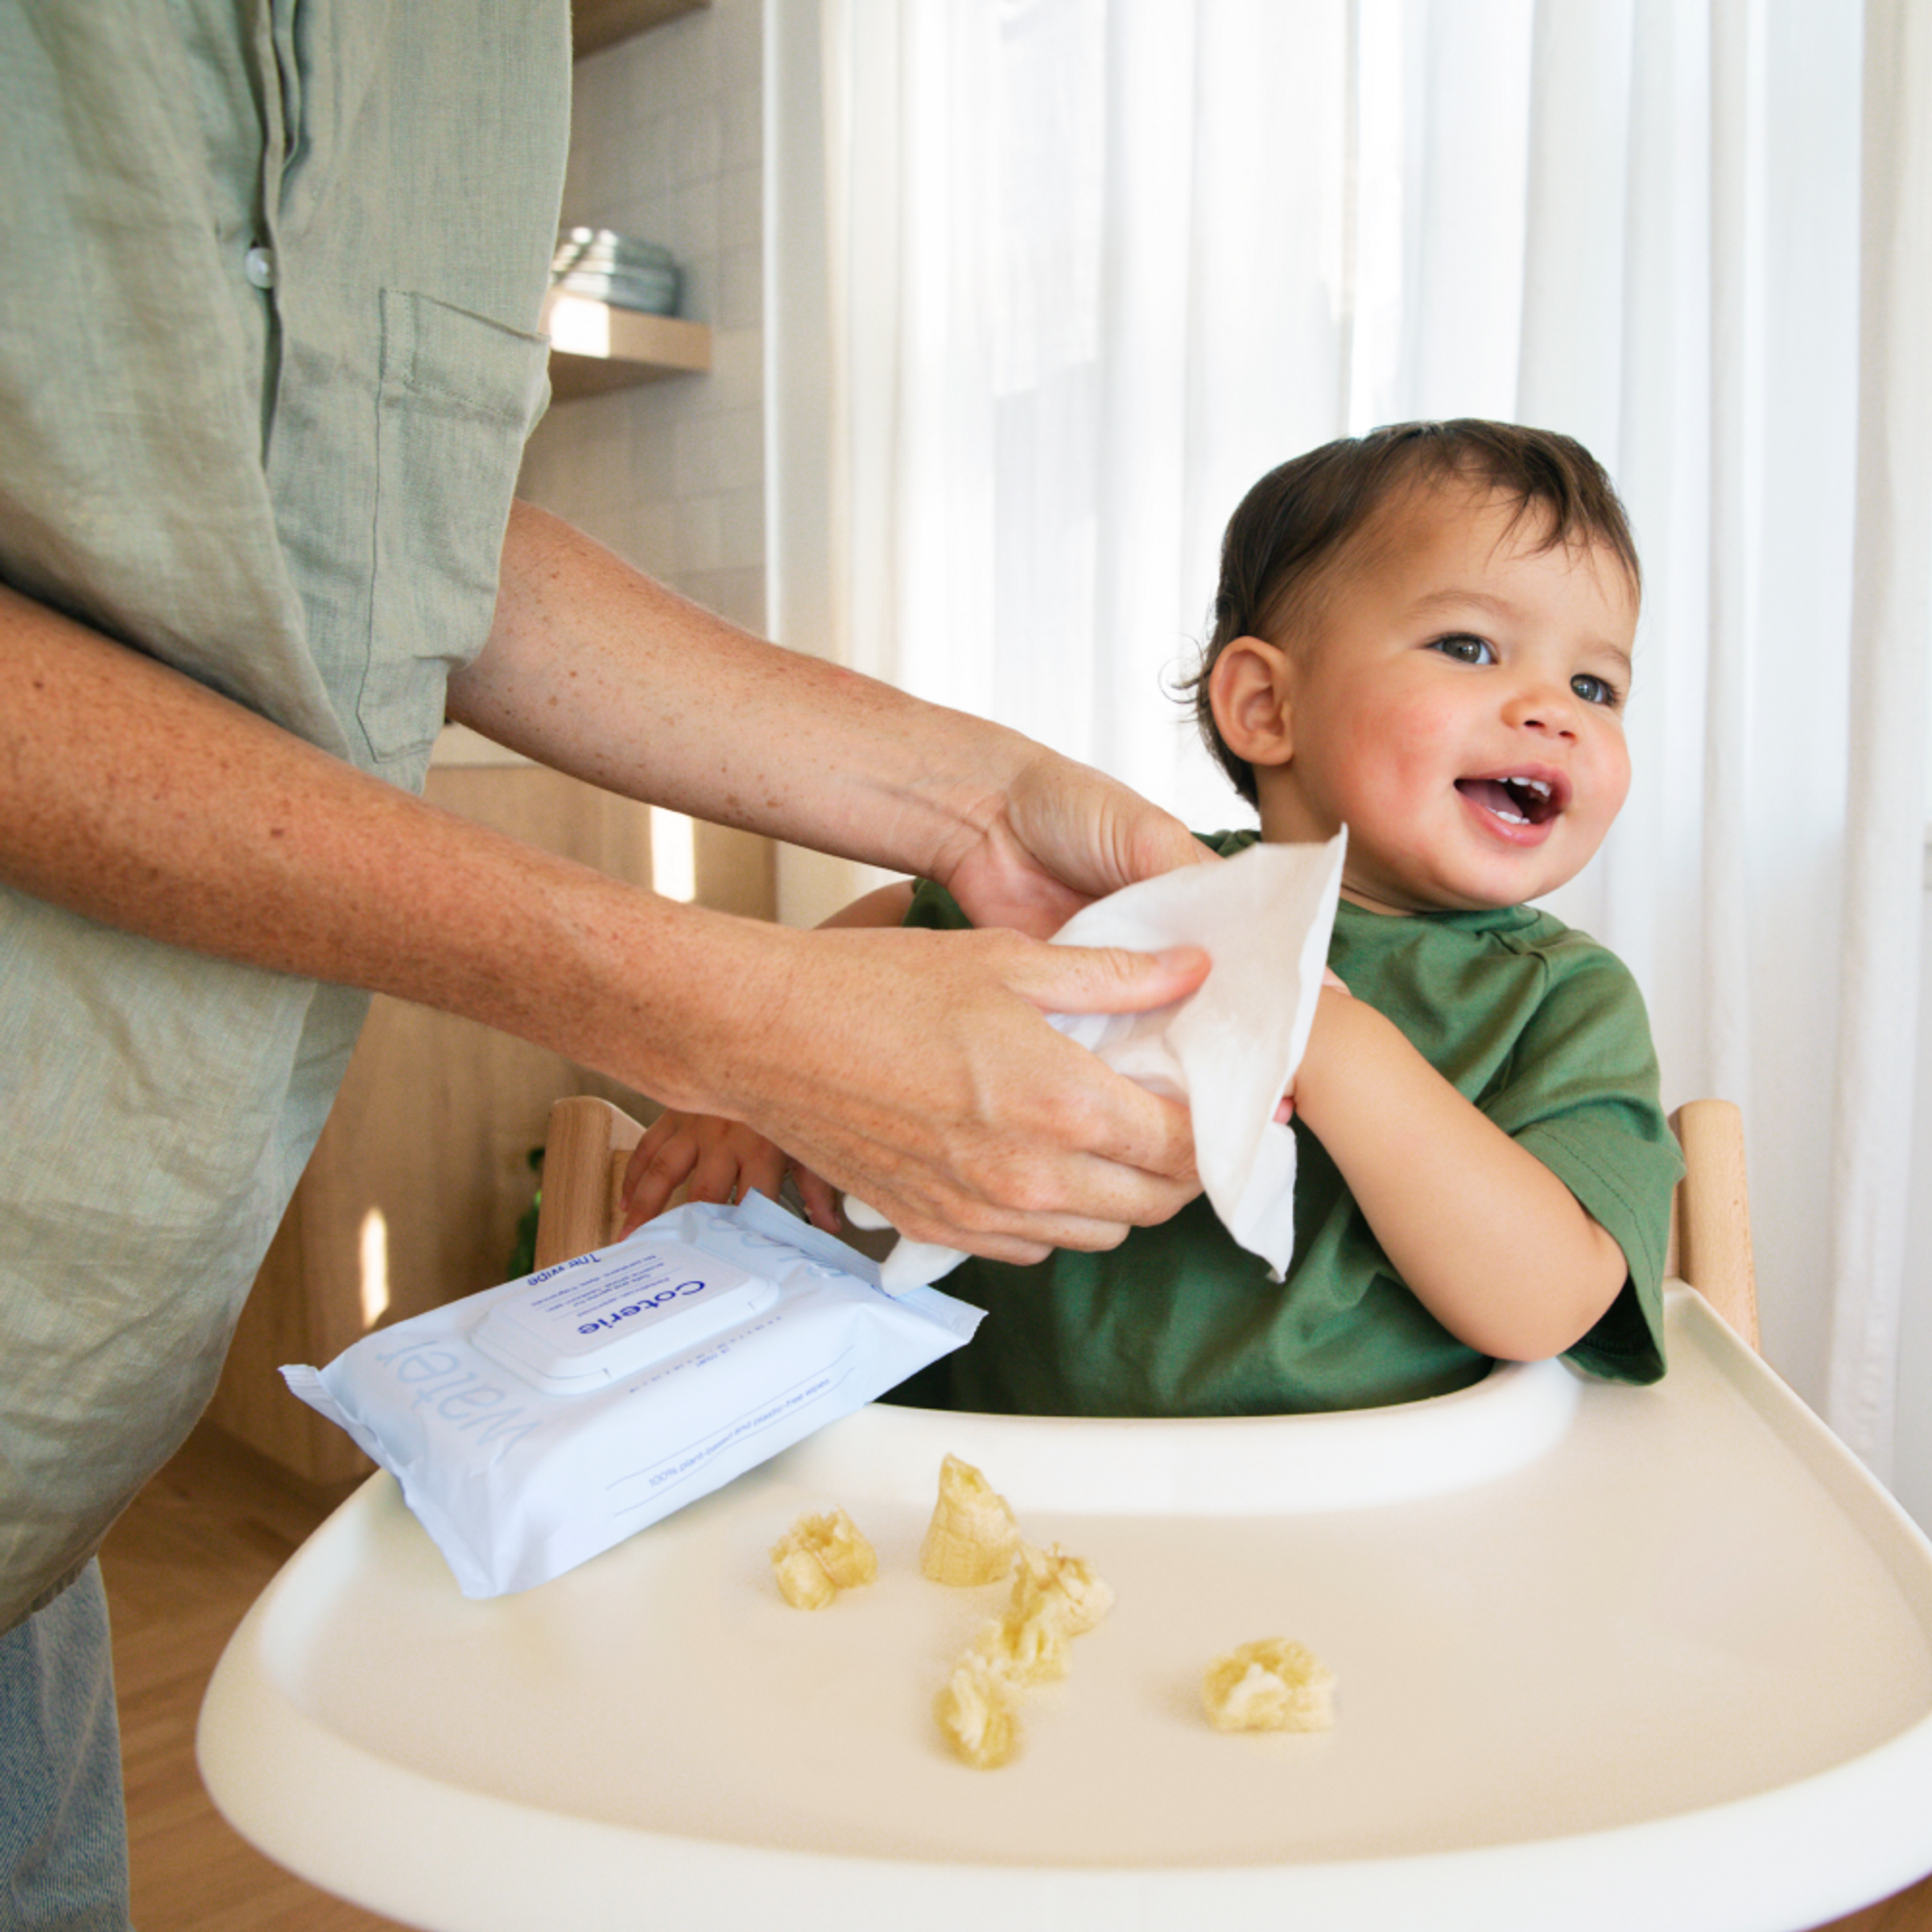 An adult is using a wipe to clean a child after eating